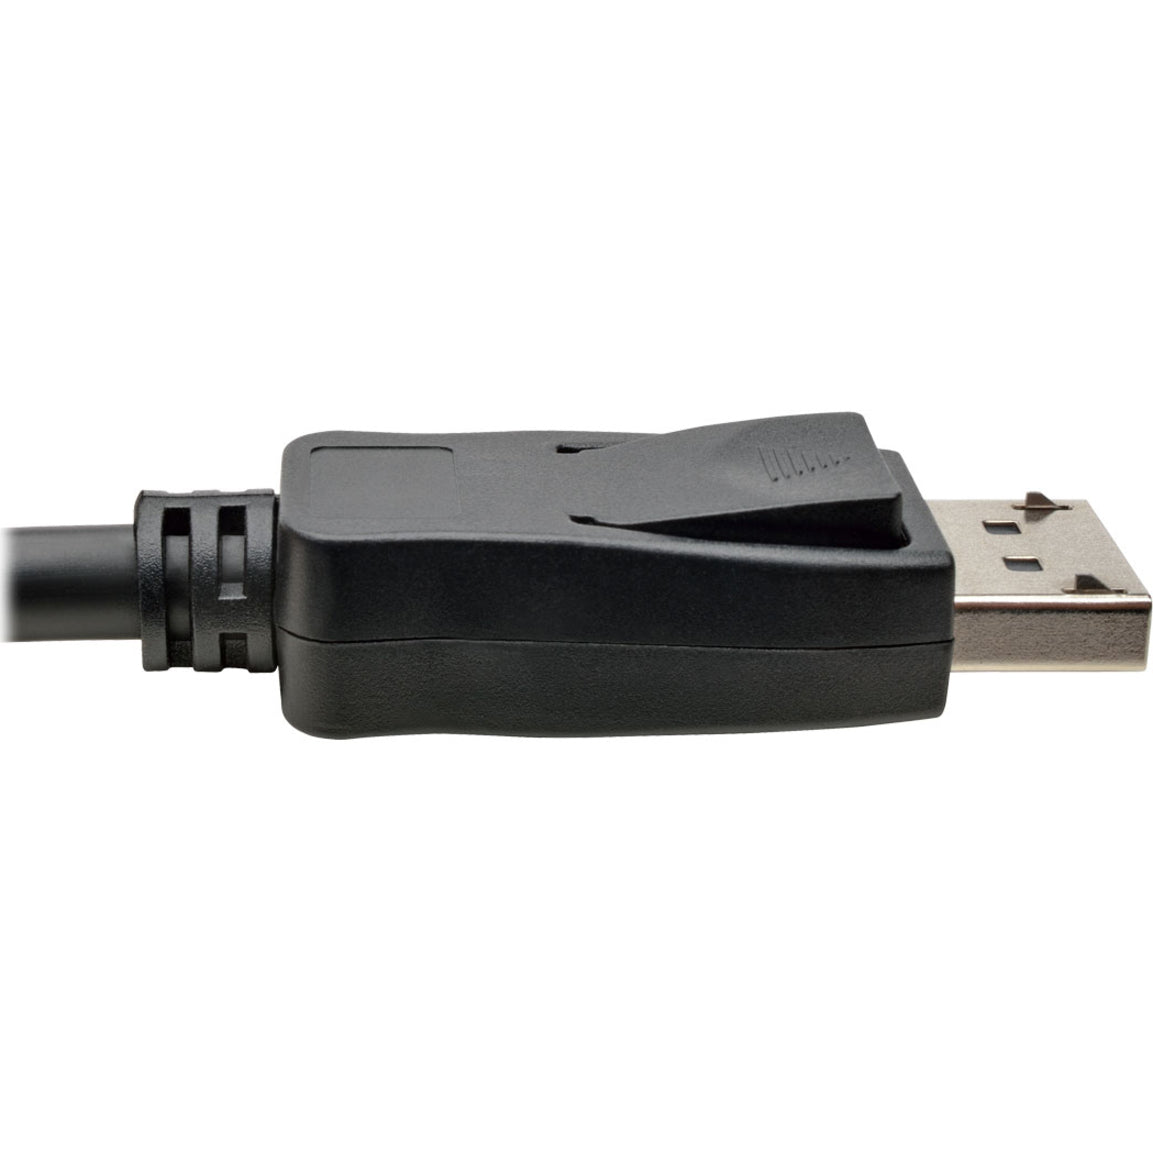 Tripp Lite P582-012-HD-V2A DisplayPort 1.2a to HDMI Active Adapter Cable (M/M), 12 ft.